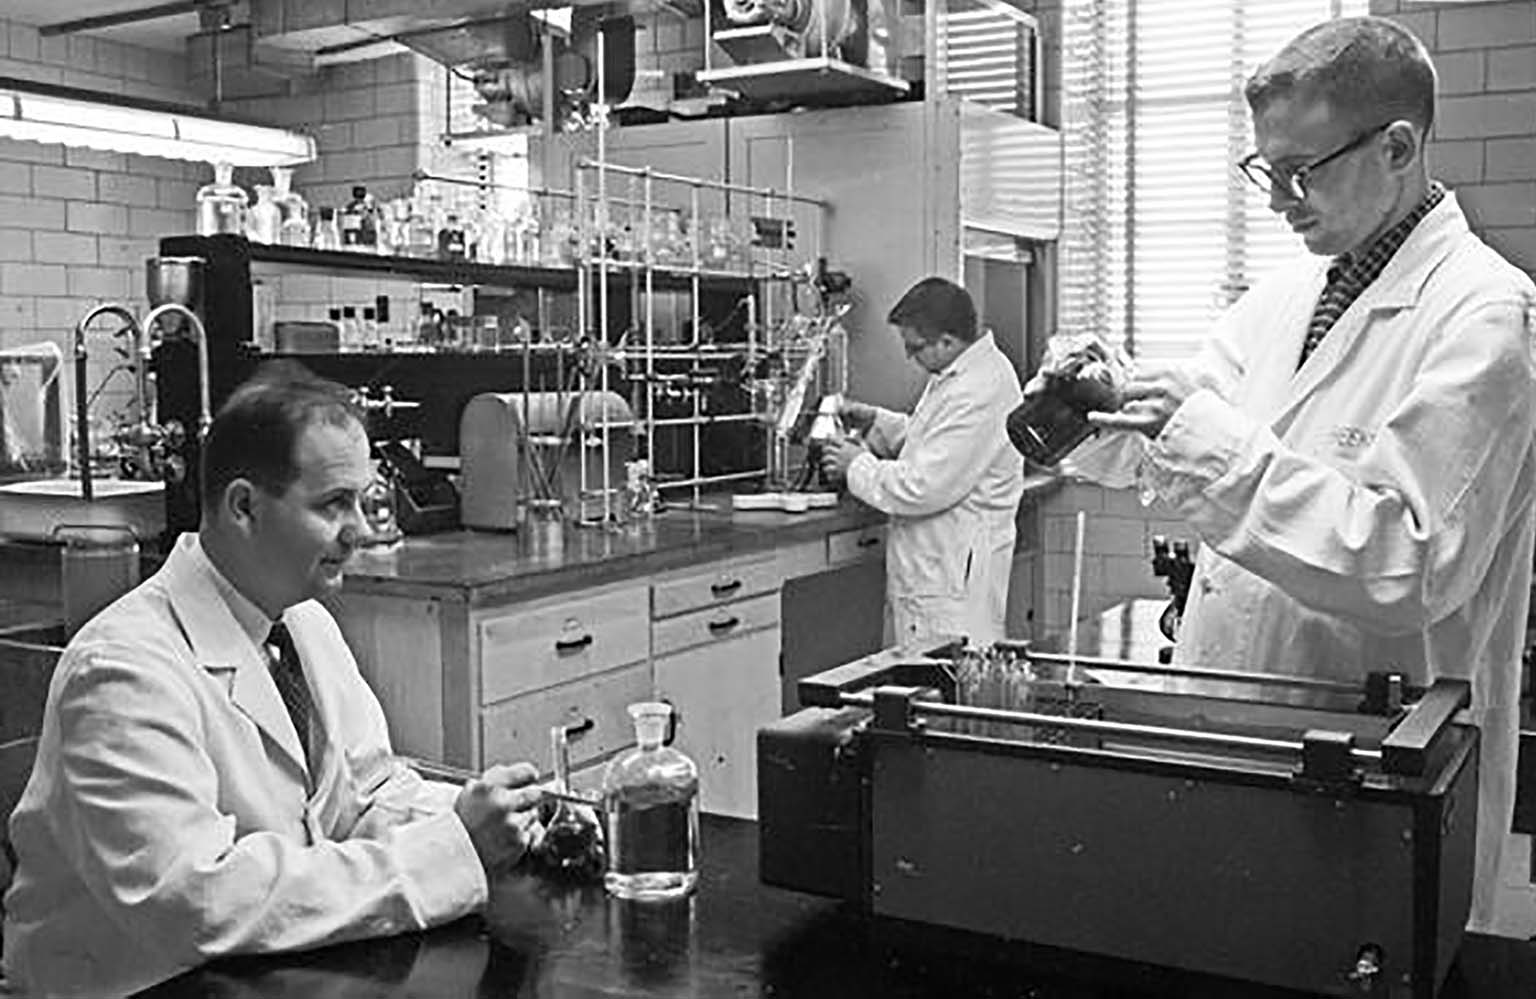 Frank Zeller (left) sitting at a table in his lab in May 1958. Two young men (students?) are working at benches in the lab.